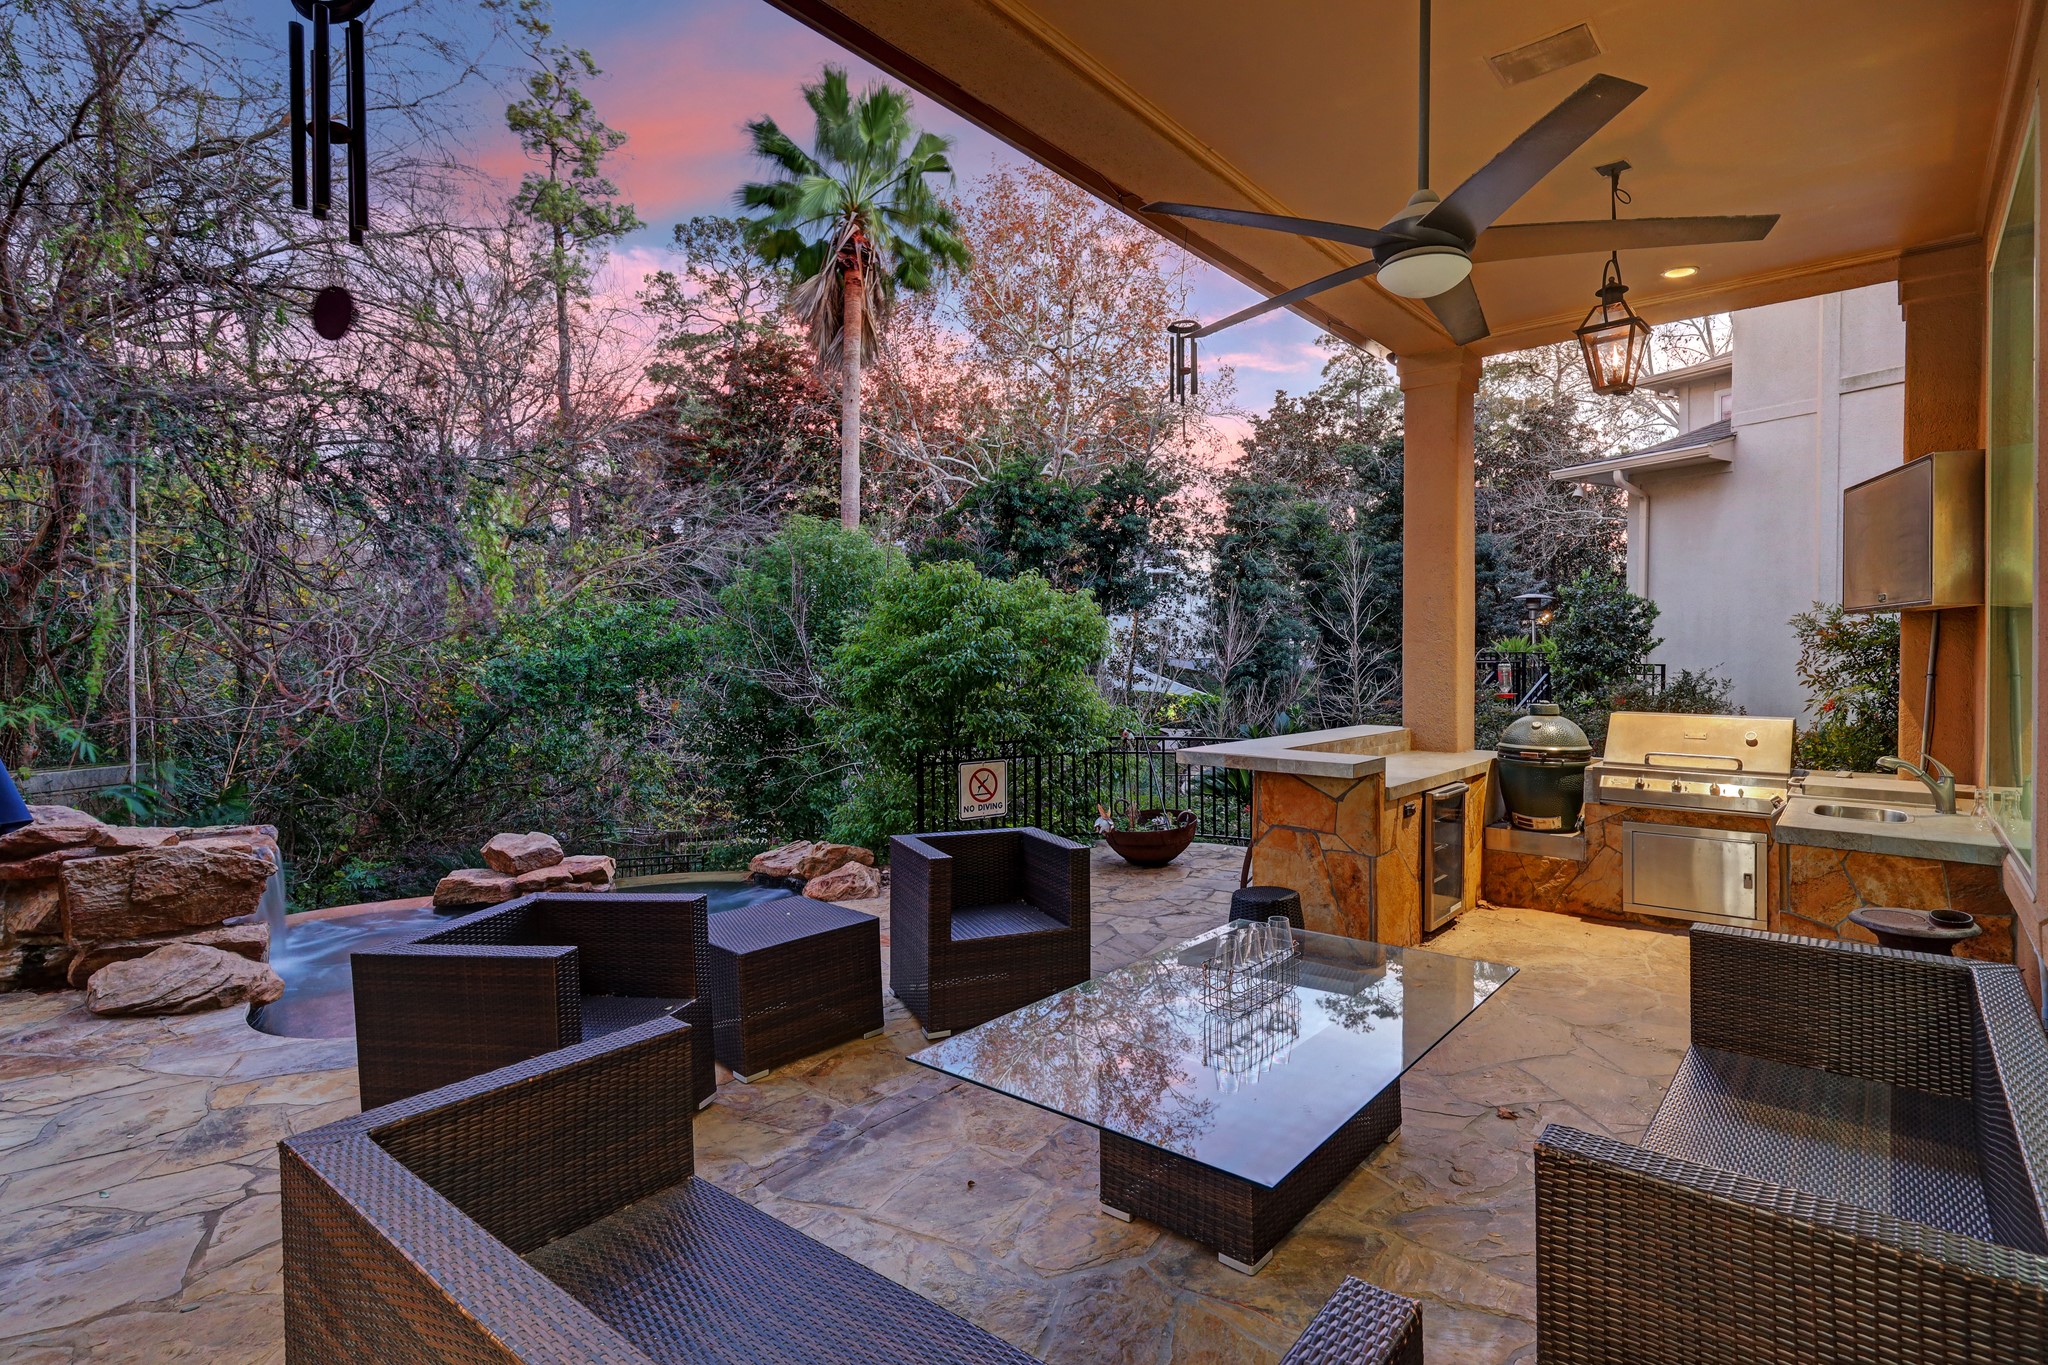 The Backyard Oasis features a covered patio/summer kitchen with grill, Green Egg and TV, plunge pool/hot tub, expansive decking and meandering terraces surrounded by lush landscaping.